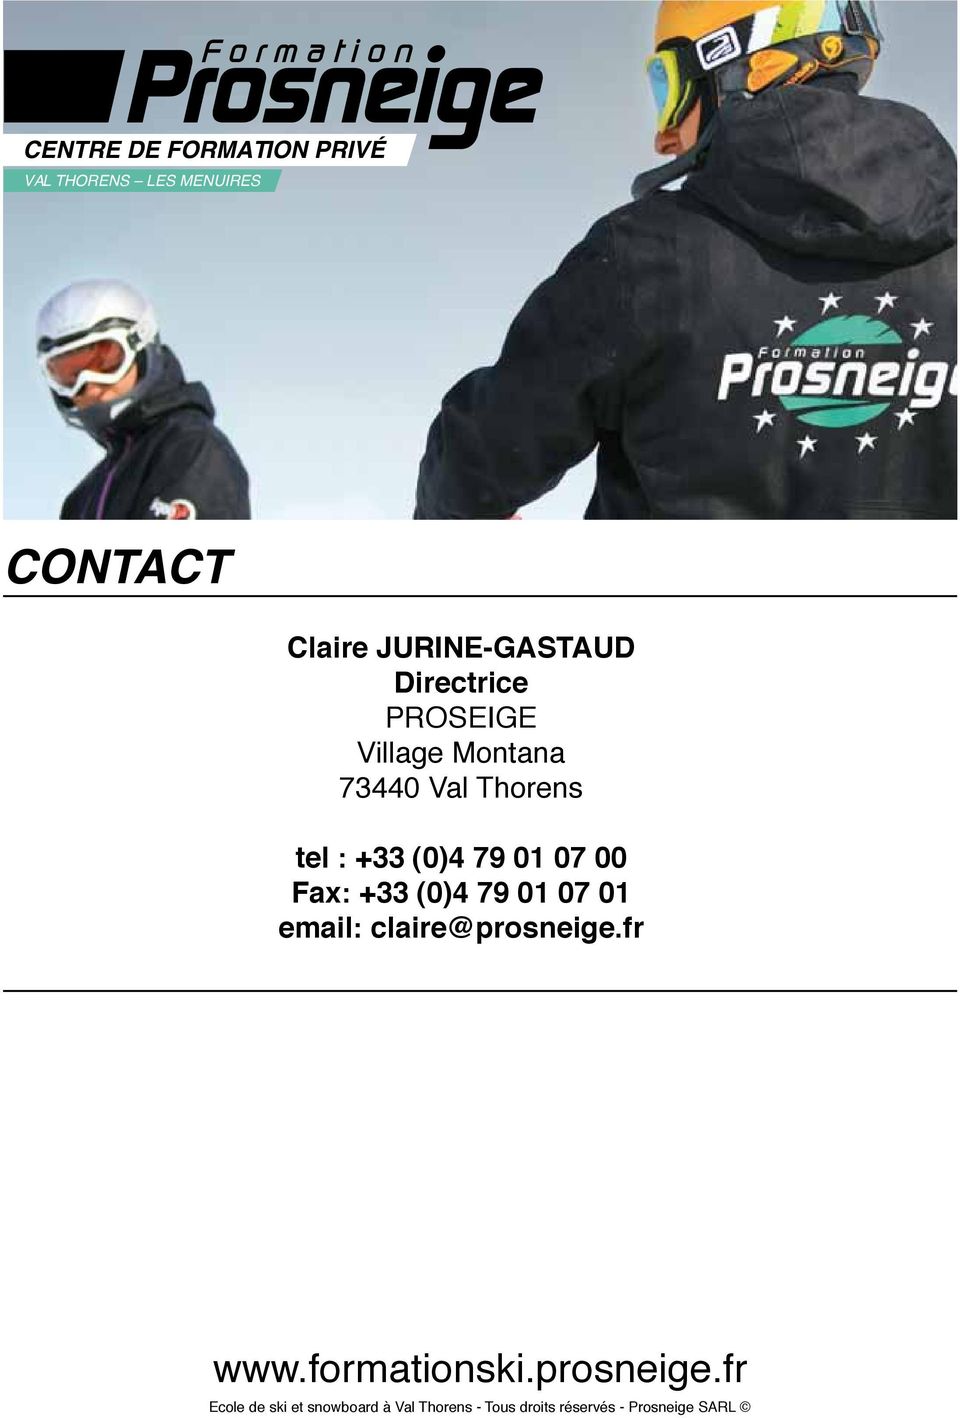 Fax: +33 (0)4 79 01 07 01 email: claire@prosneige.